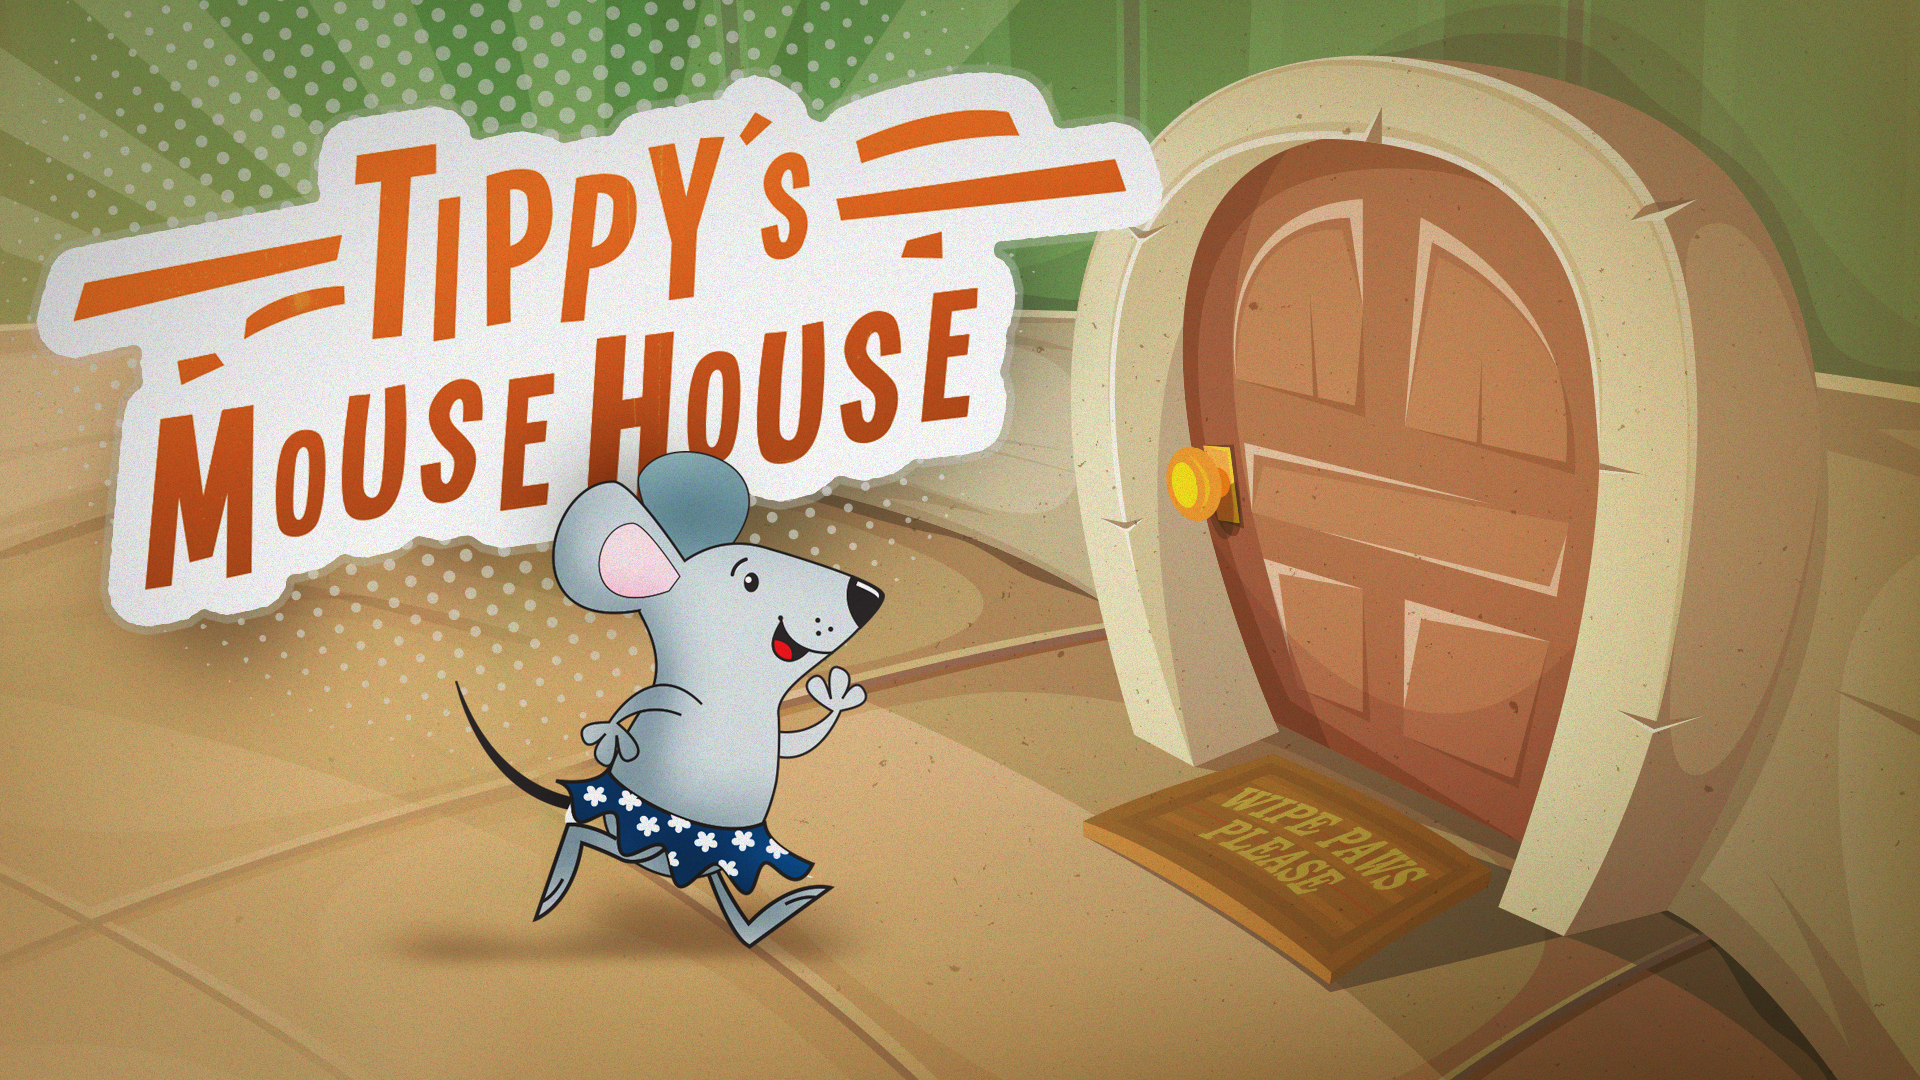 Blog - Wagener's Complete Guide To The House Mouse